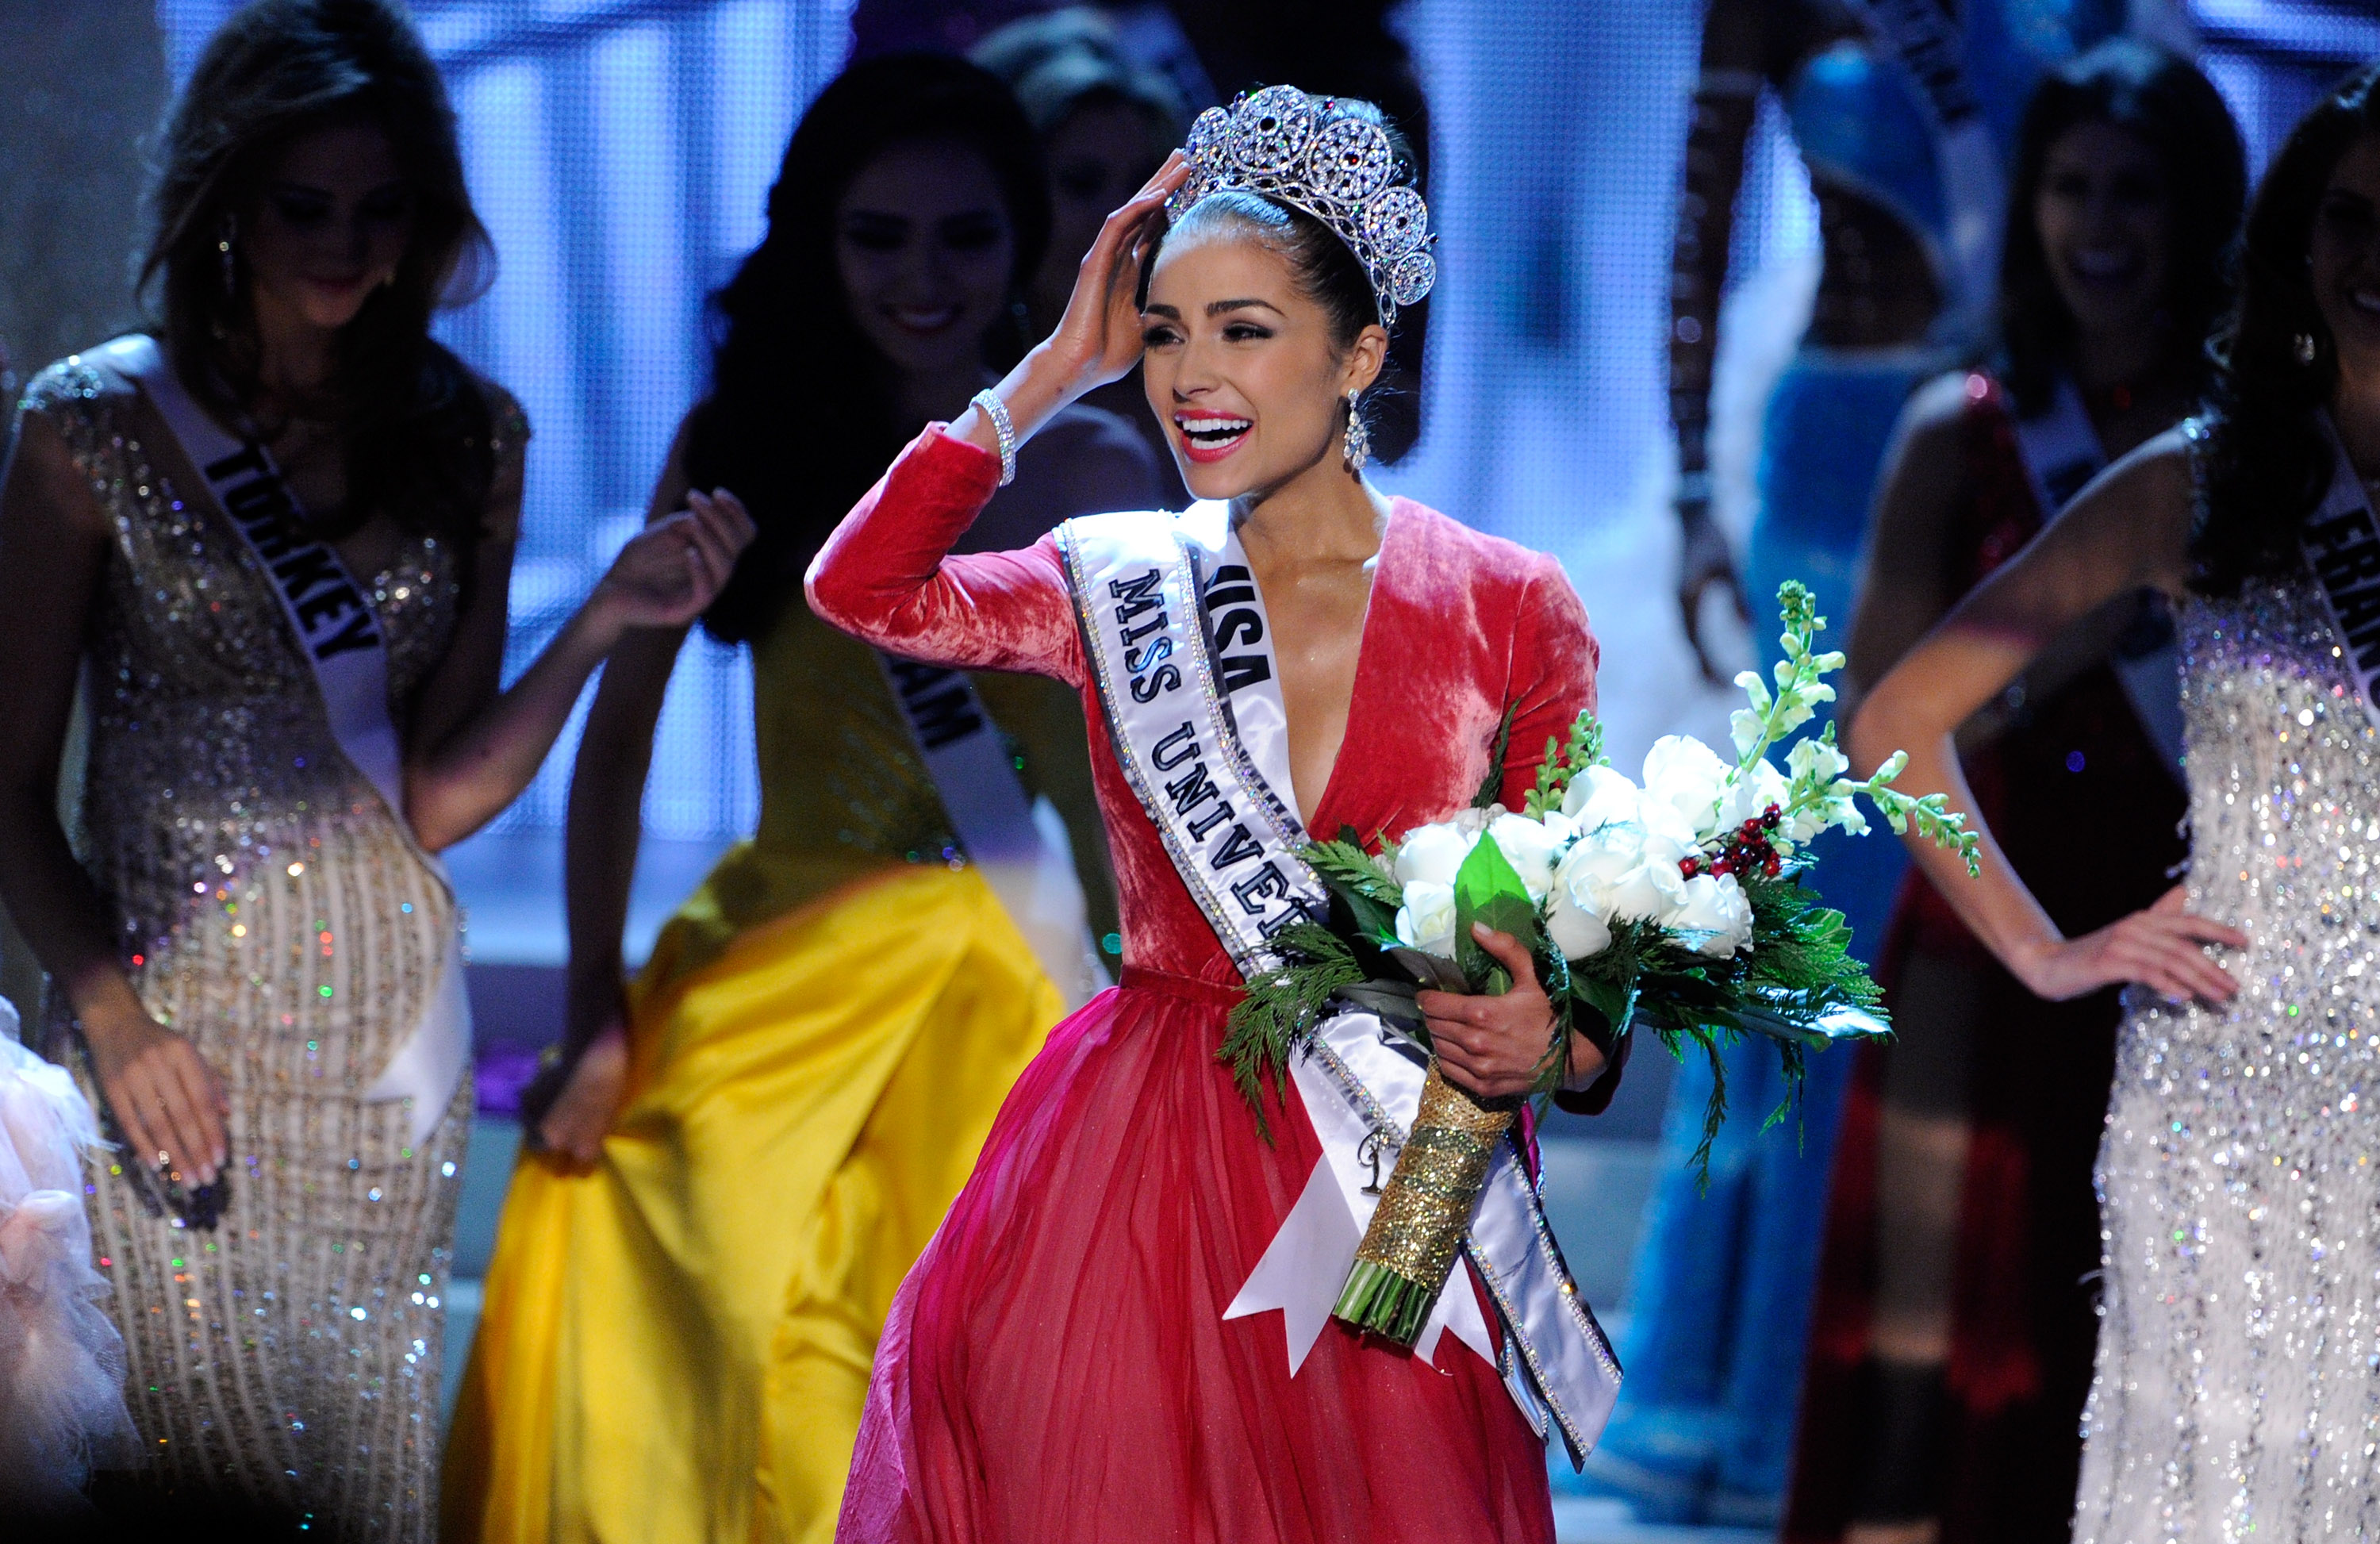 Miss USA 2012, Olivia Culpo, is crowned 2012 Miss Universe